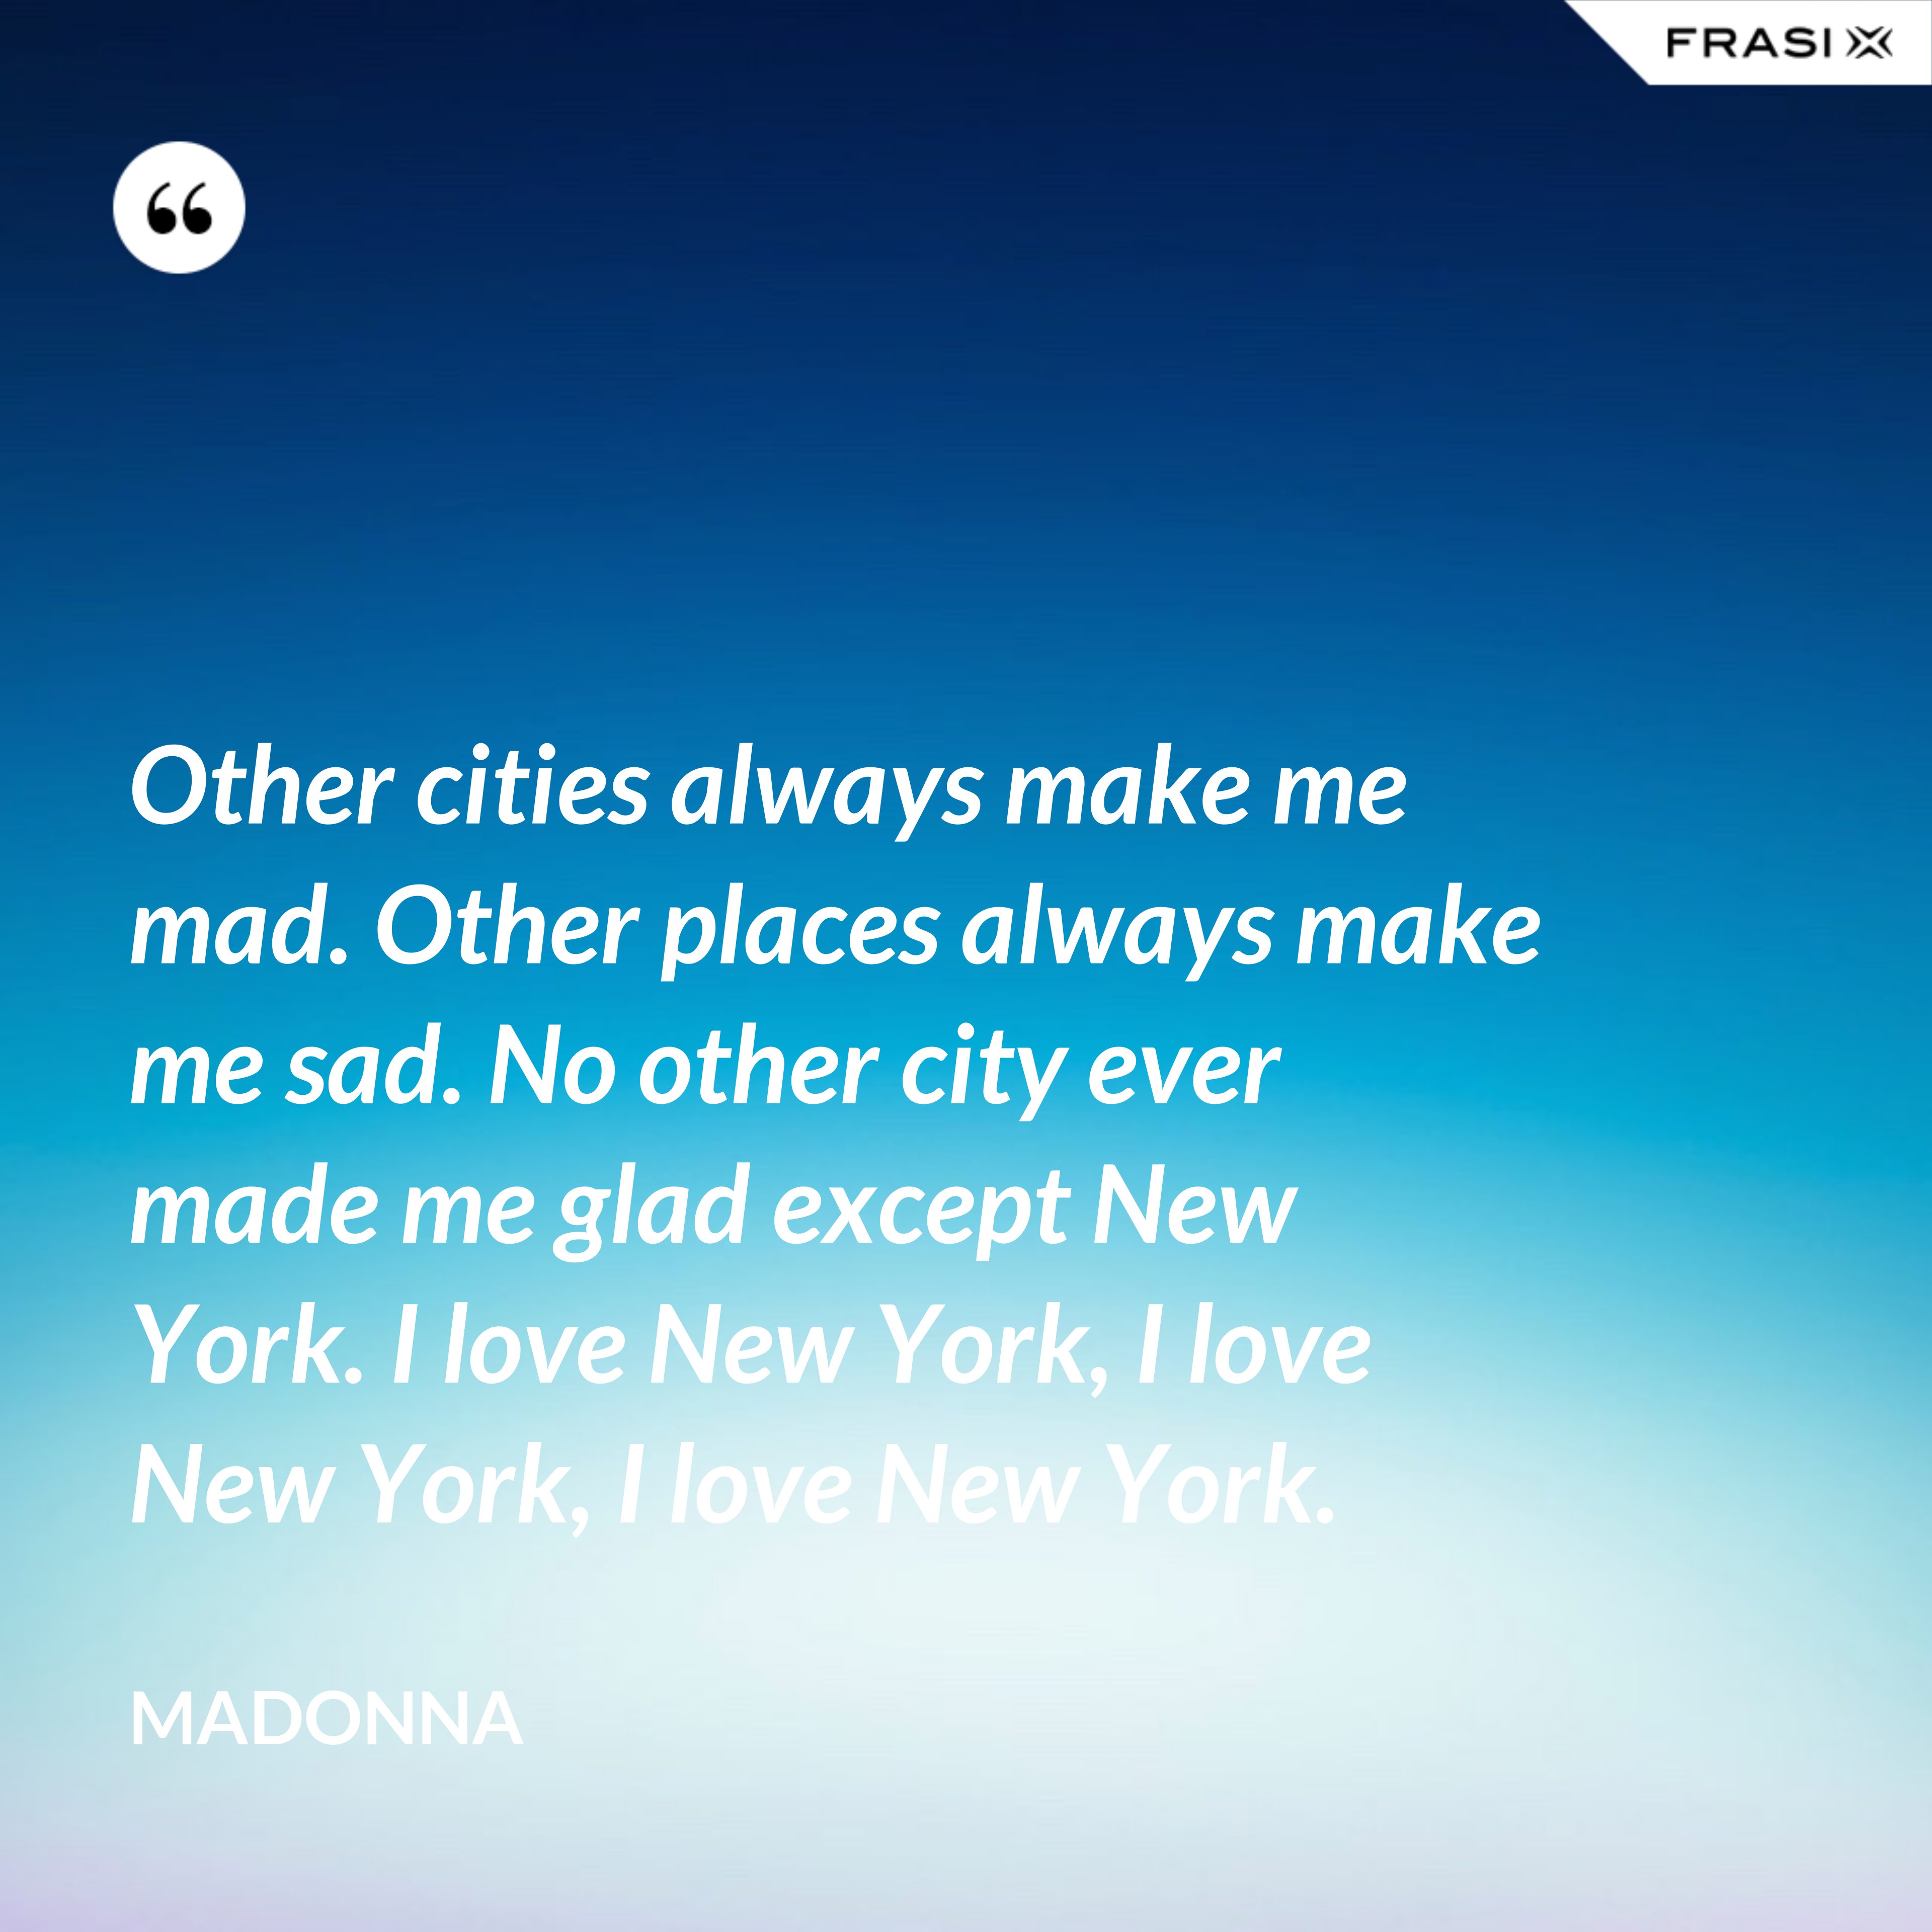 Other cities always make me mad. Other places always make me sad. No other city ever made me glad except New York. I love New York, I love New York, I love New York. - Madonna